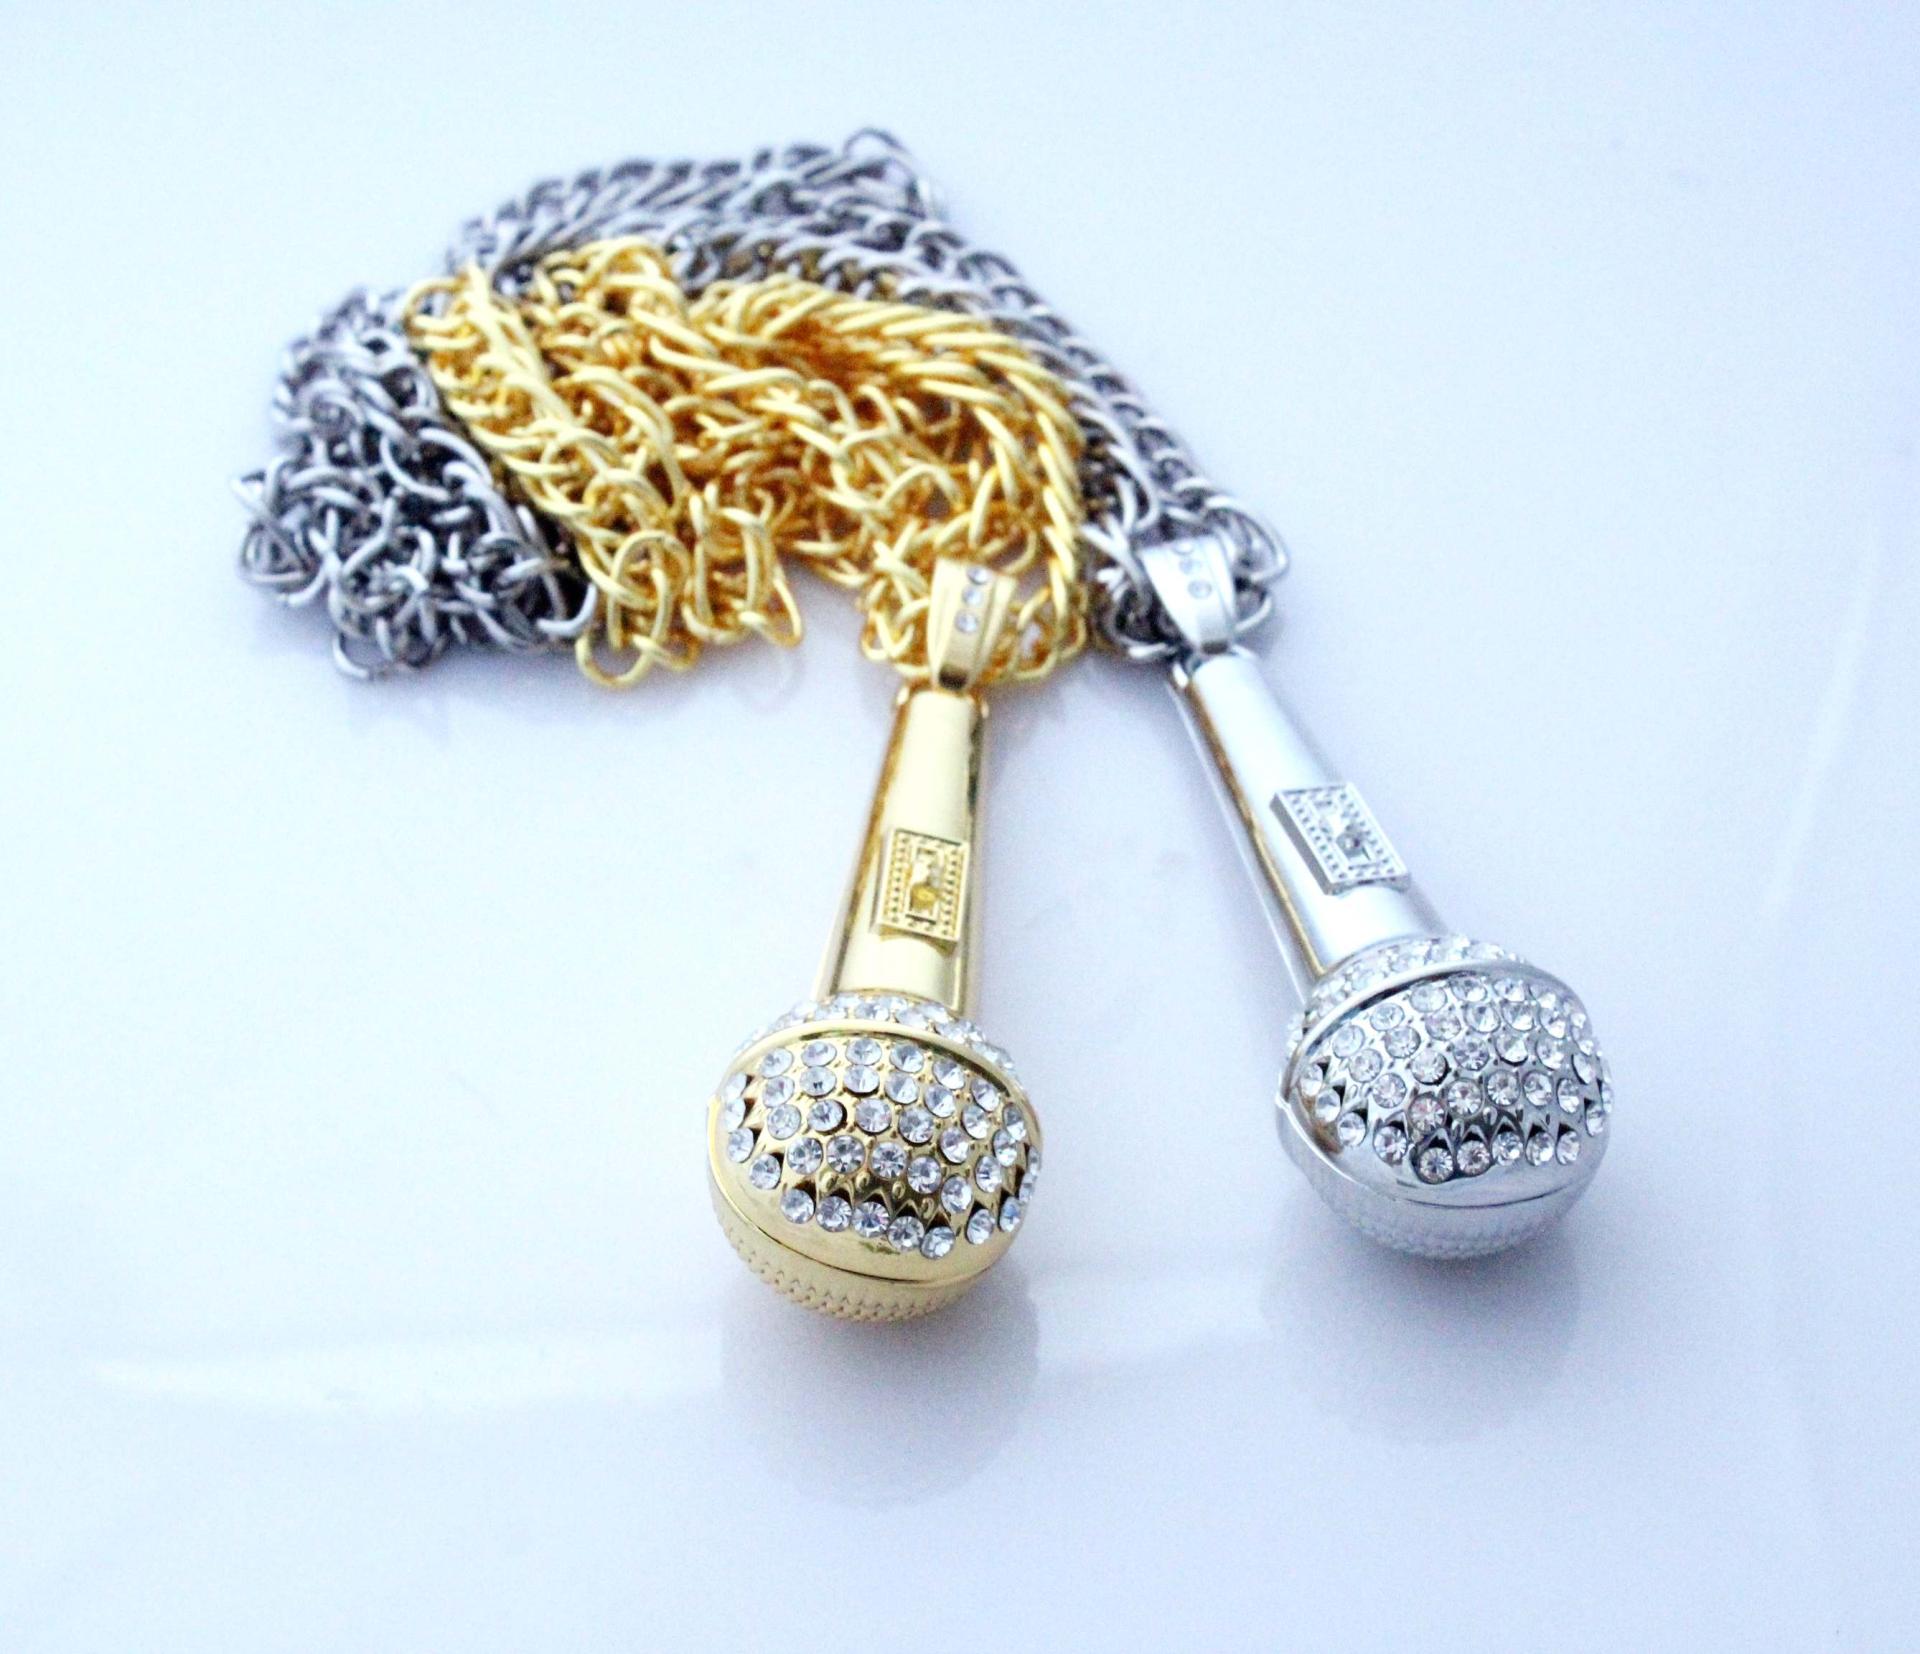 Microphone Necklace  Large Hip Hop /Rapper -Gold or Silver